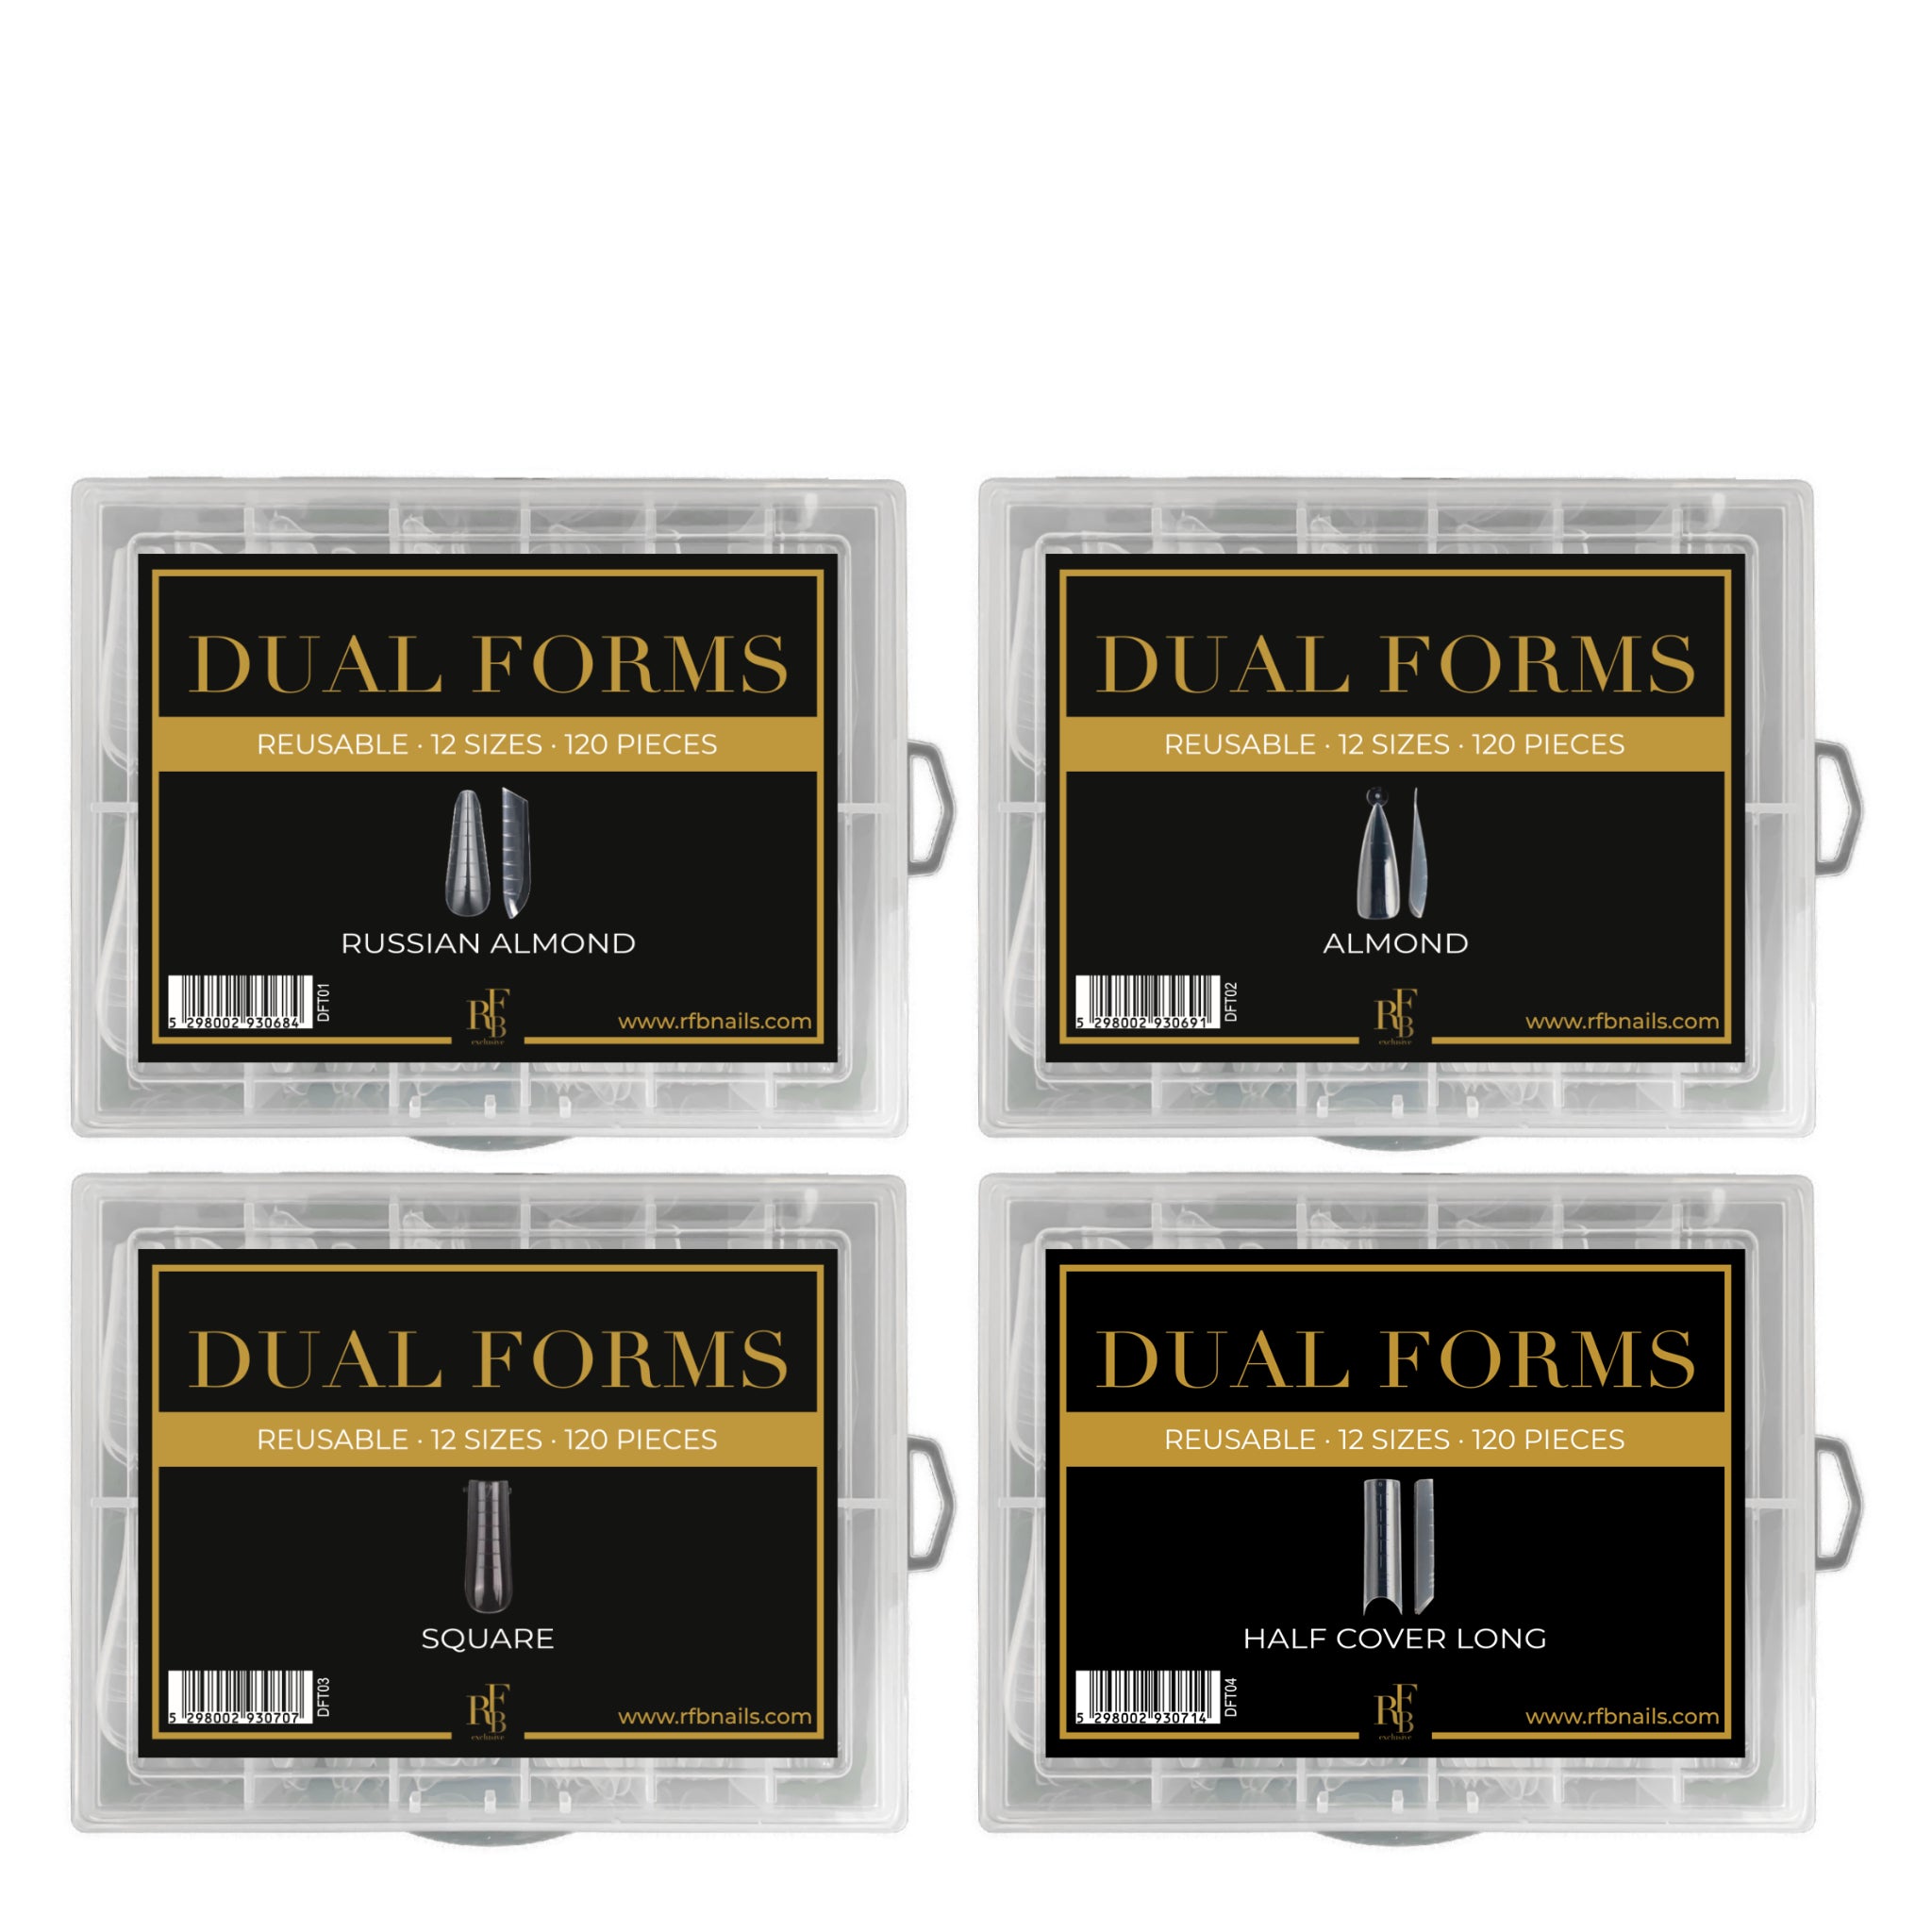 All Dual Forms Bundle